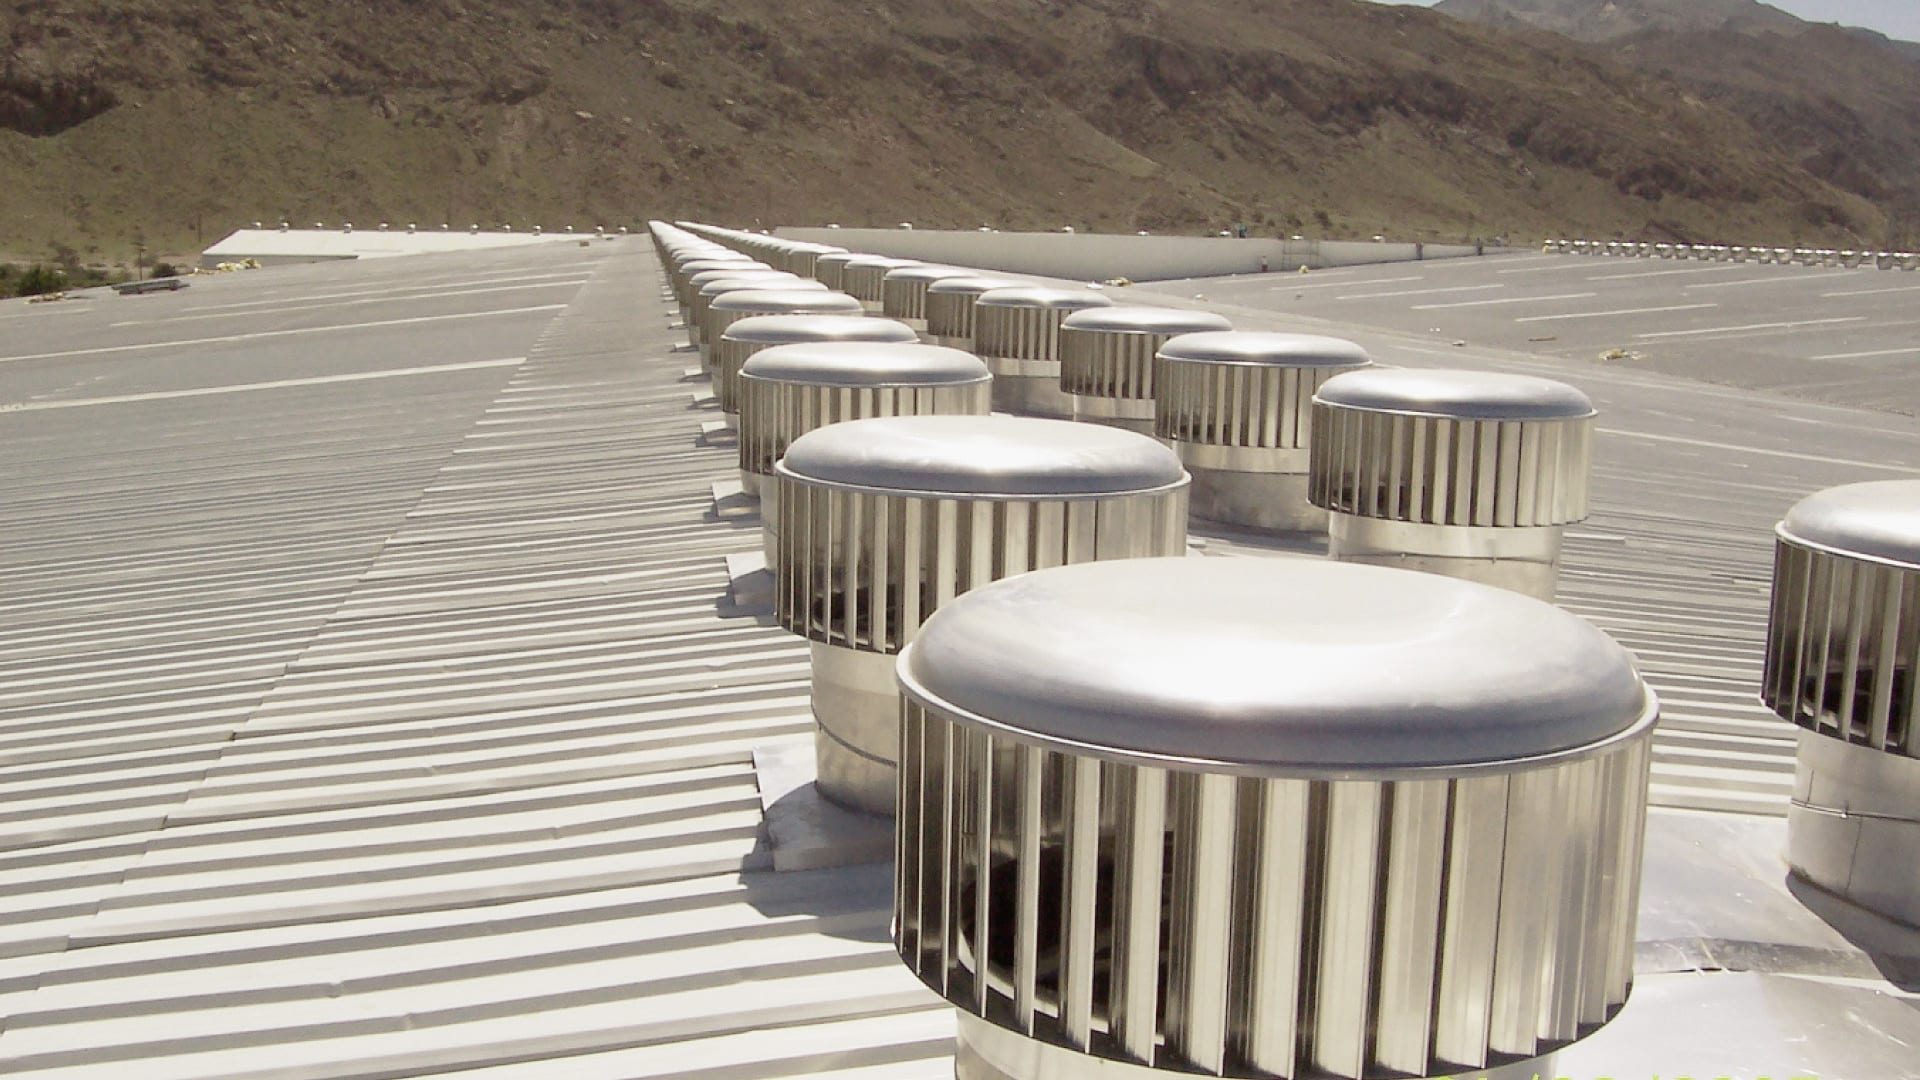 Commercial Roofing & Roof Vents, Industrial Whirlybirds Australia